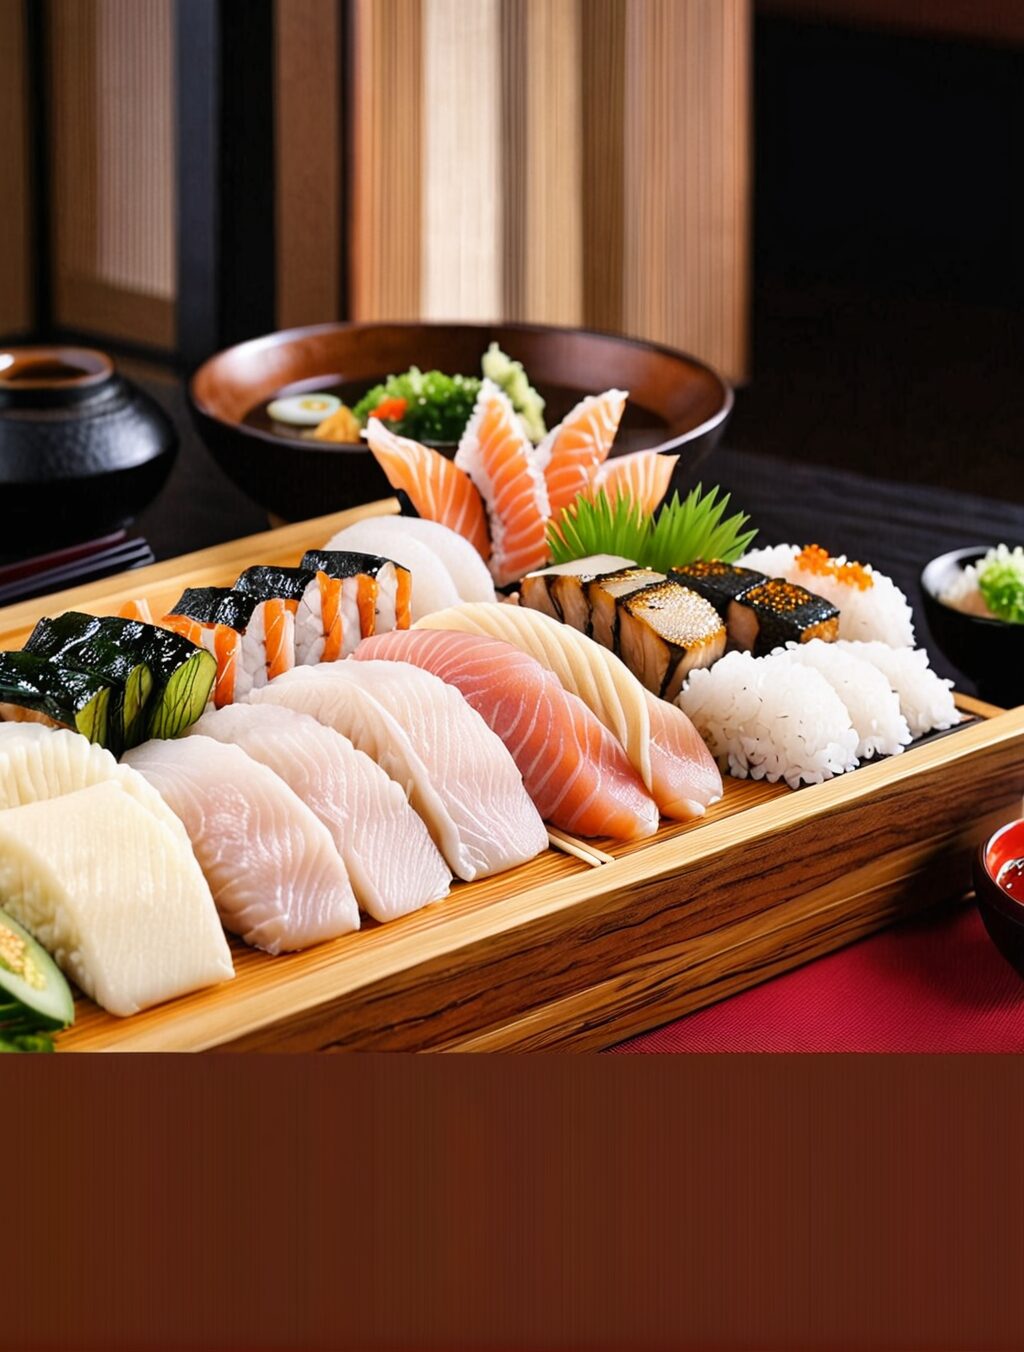 why is food so important in japanese culture